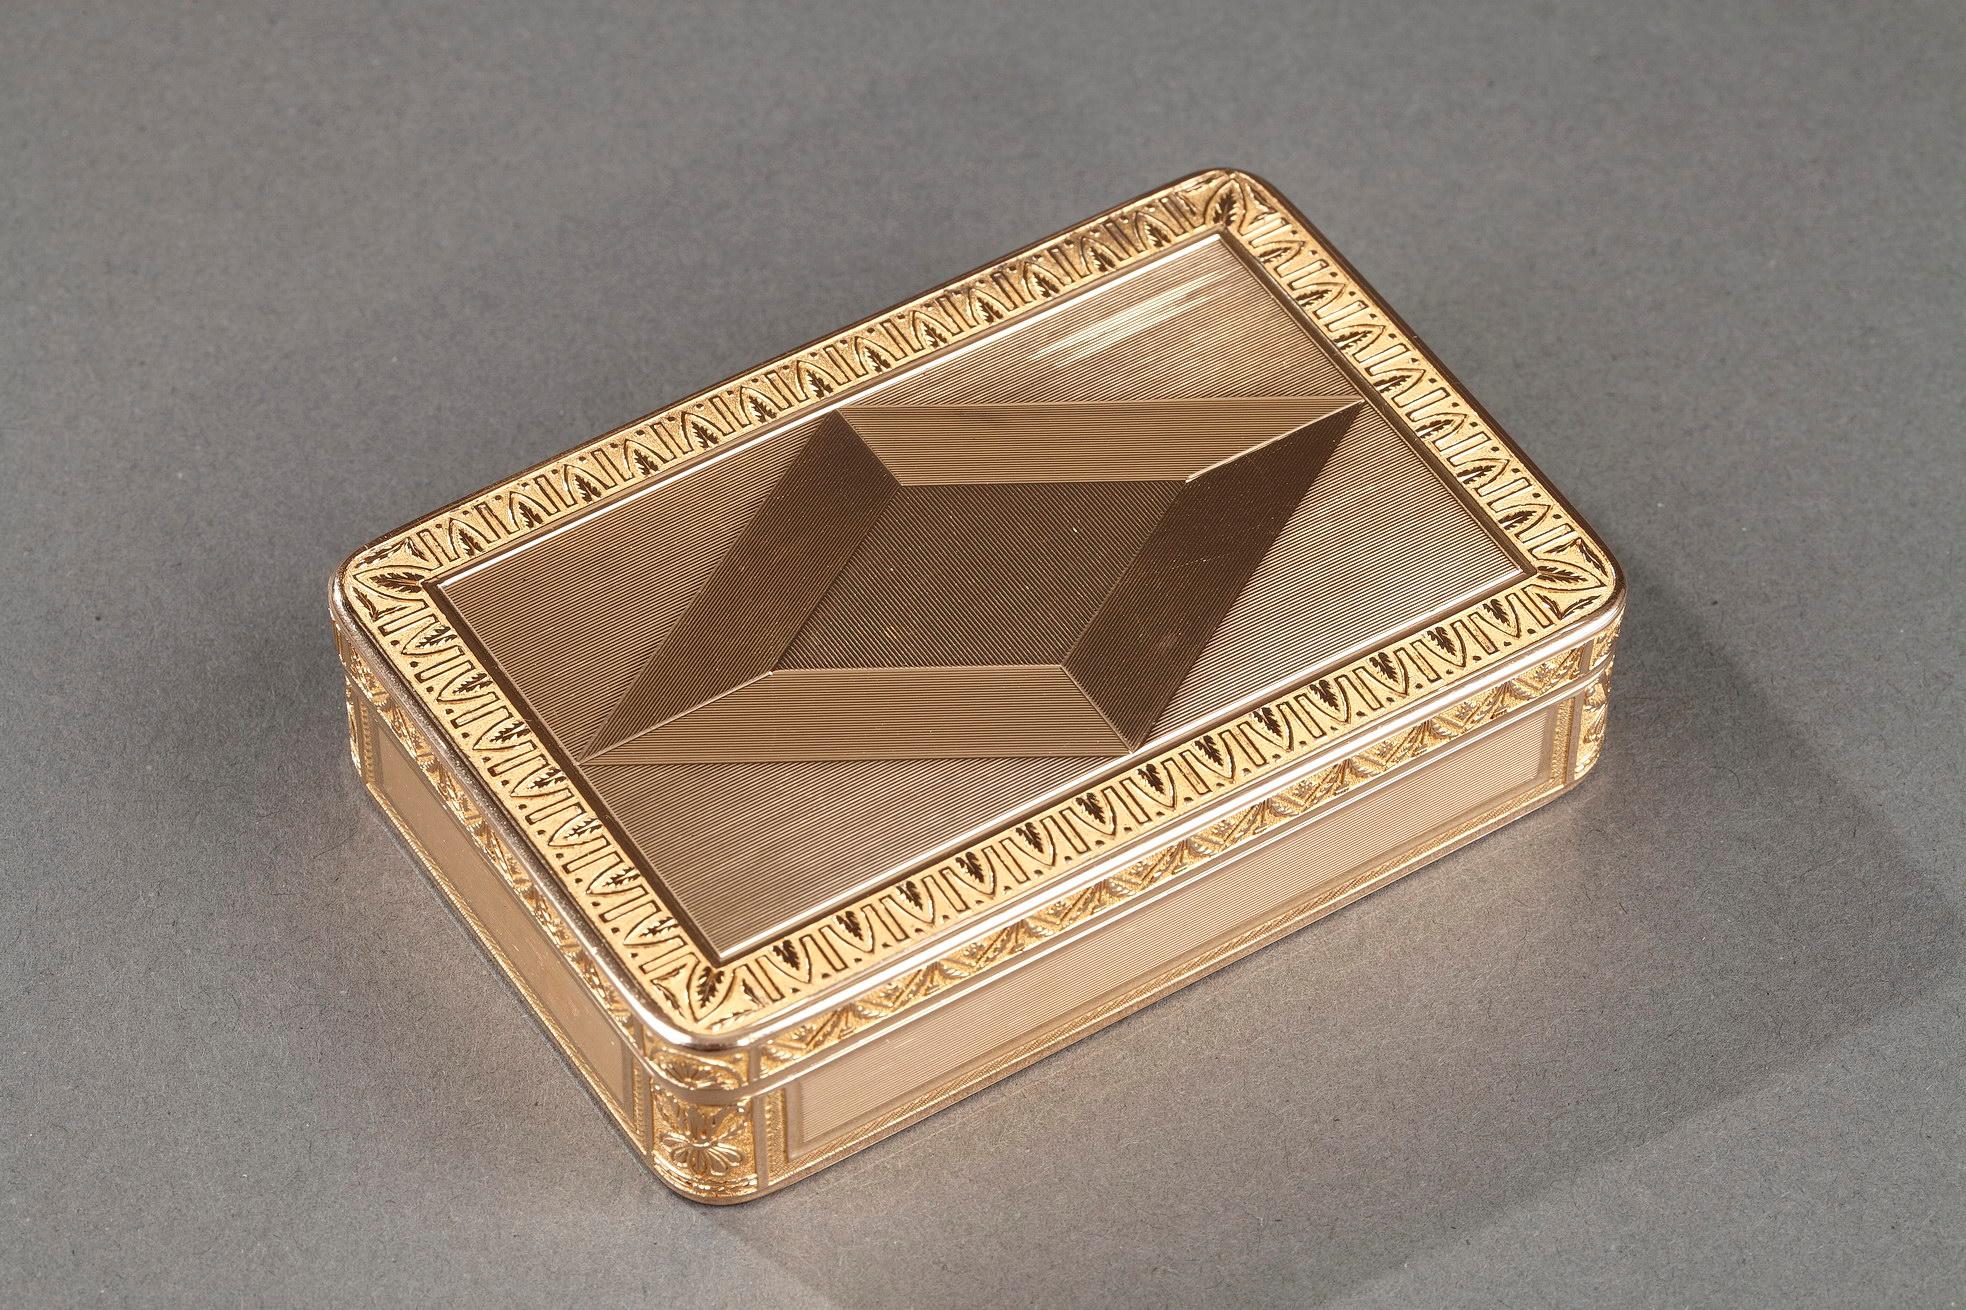 An important rectangular gold snuff box with rounded corners. The hinged cover is decorated with parallel strips forming a diamond pattern. The cover and base panels are adorned with palmette patterns on a matte background. The box is decorated with